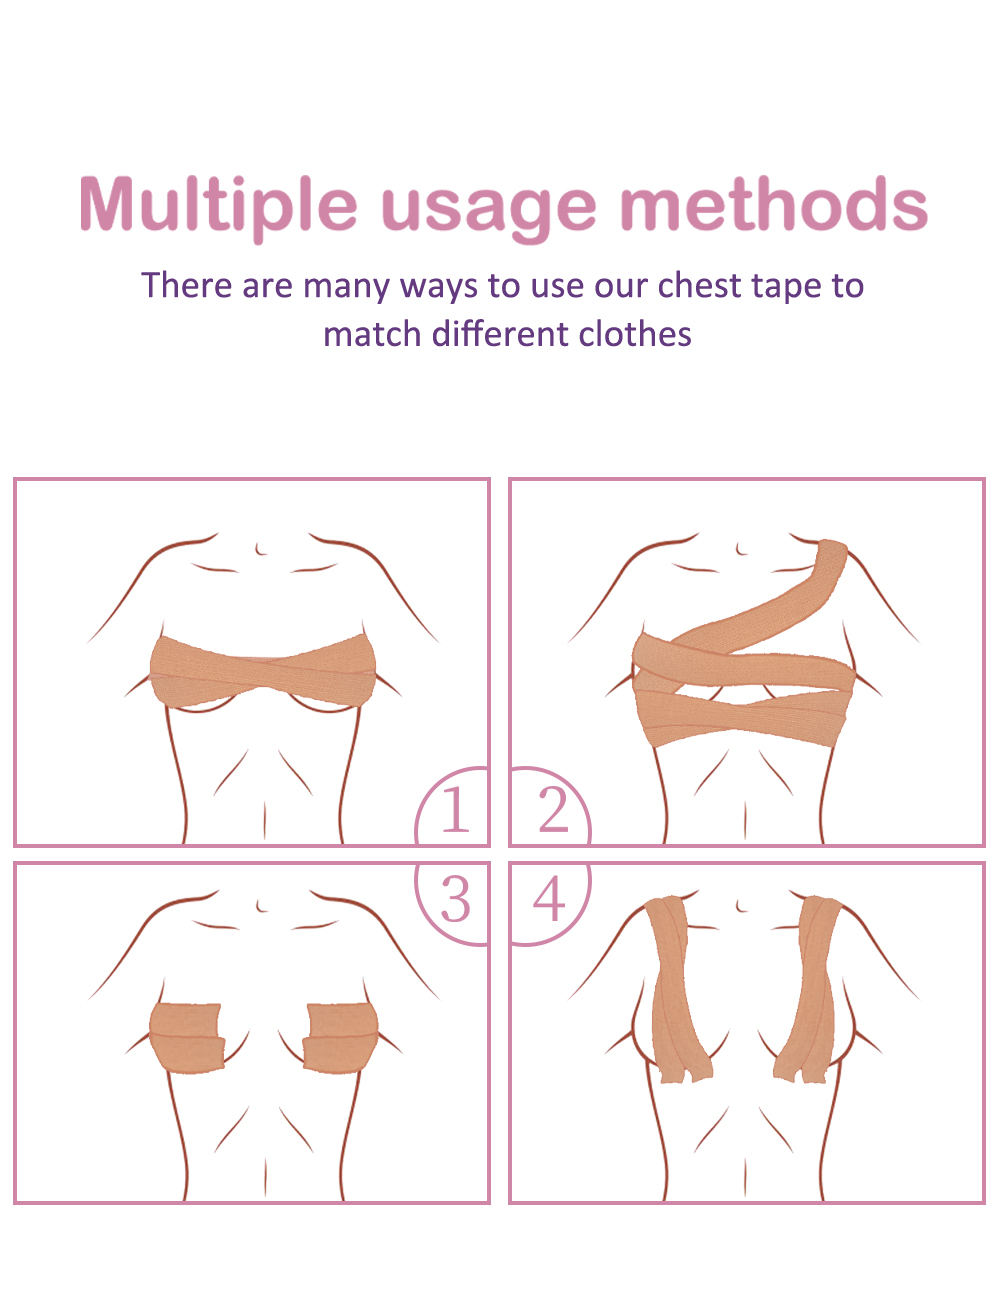 How To Apply Adhesive Breast Lift Tape